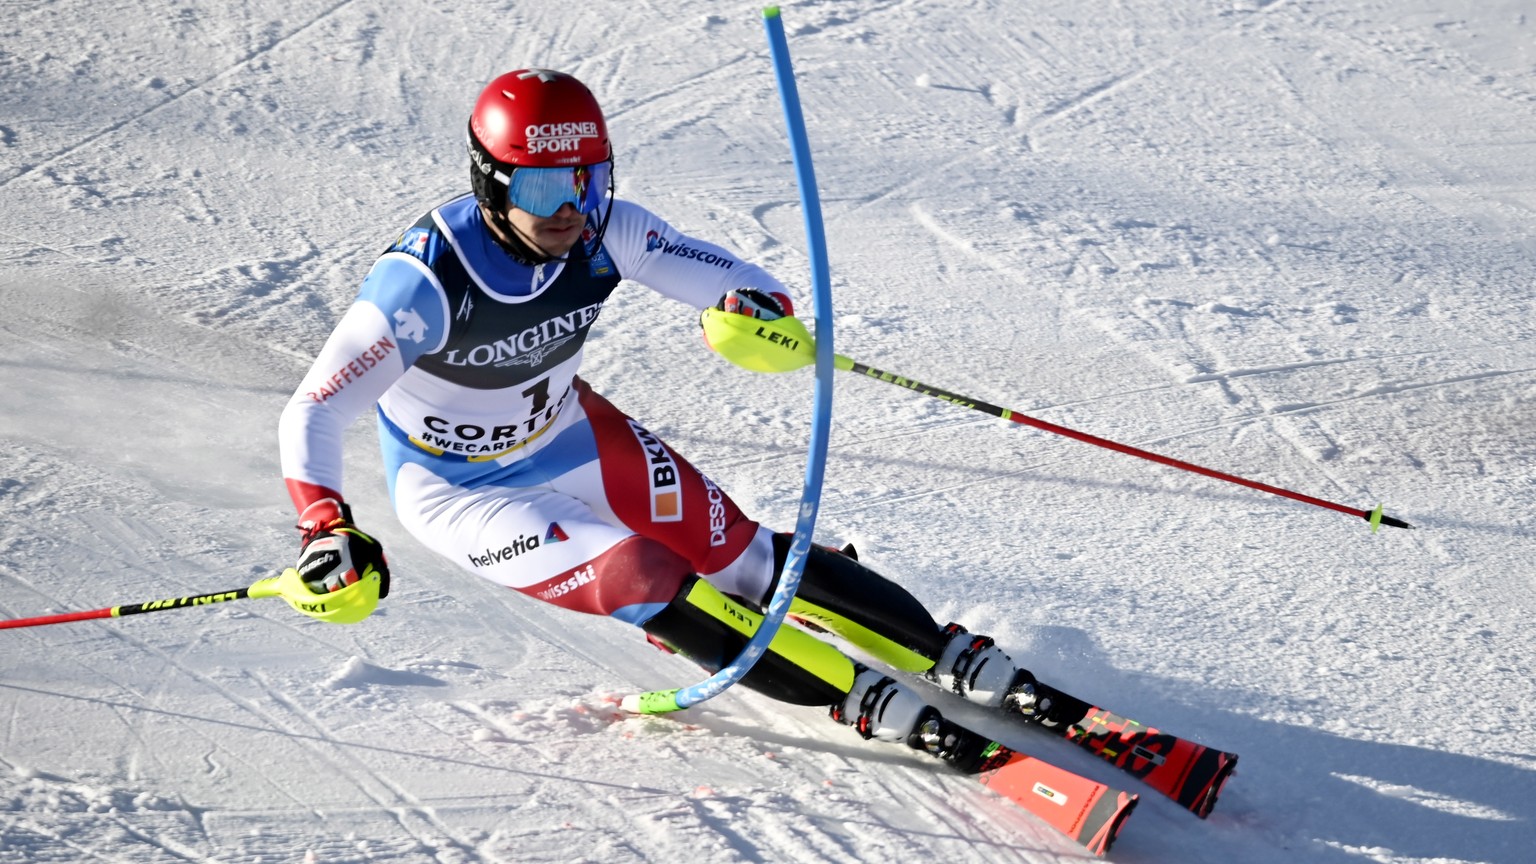 epa09014561 Loic Meillard of Switzerland cuts a gate in the Slalon race of the Men&#039;s Combined event at the Alpine Skiing World Championships in Cortina d&#039;Ampezzo, Italy, 15 February 2021. EP ...